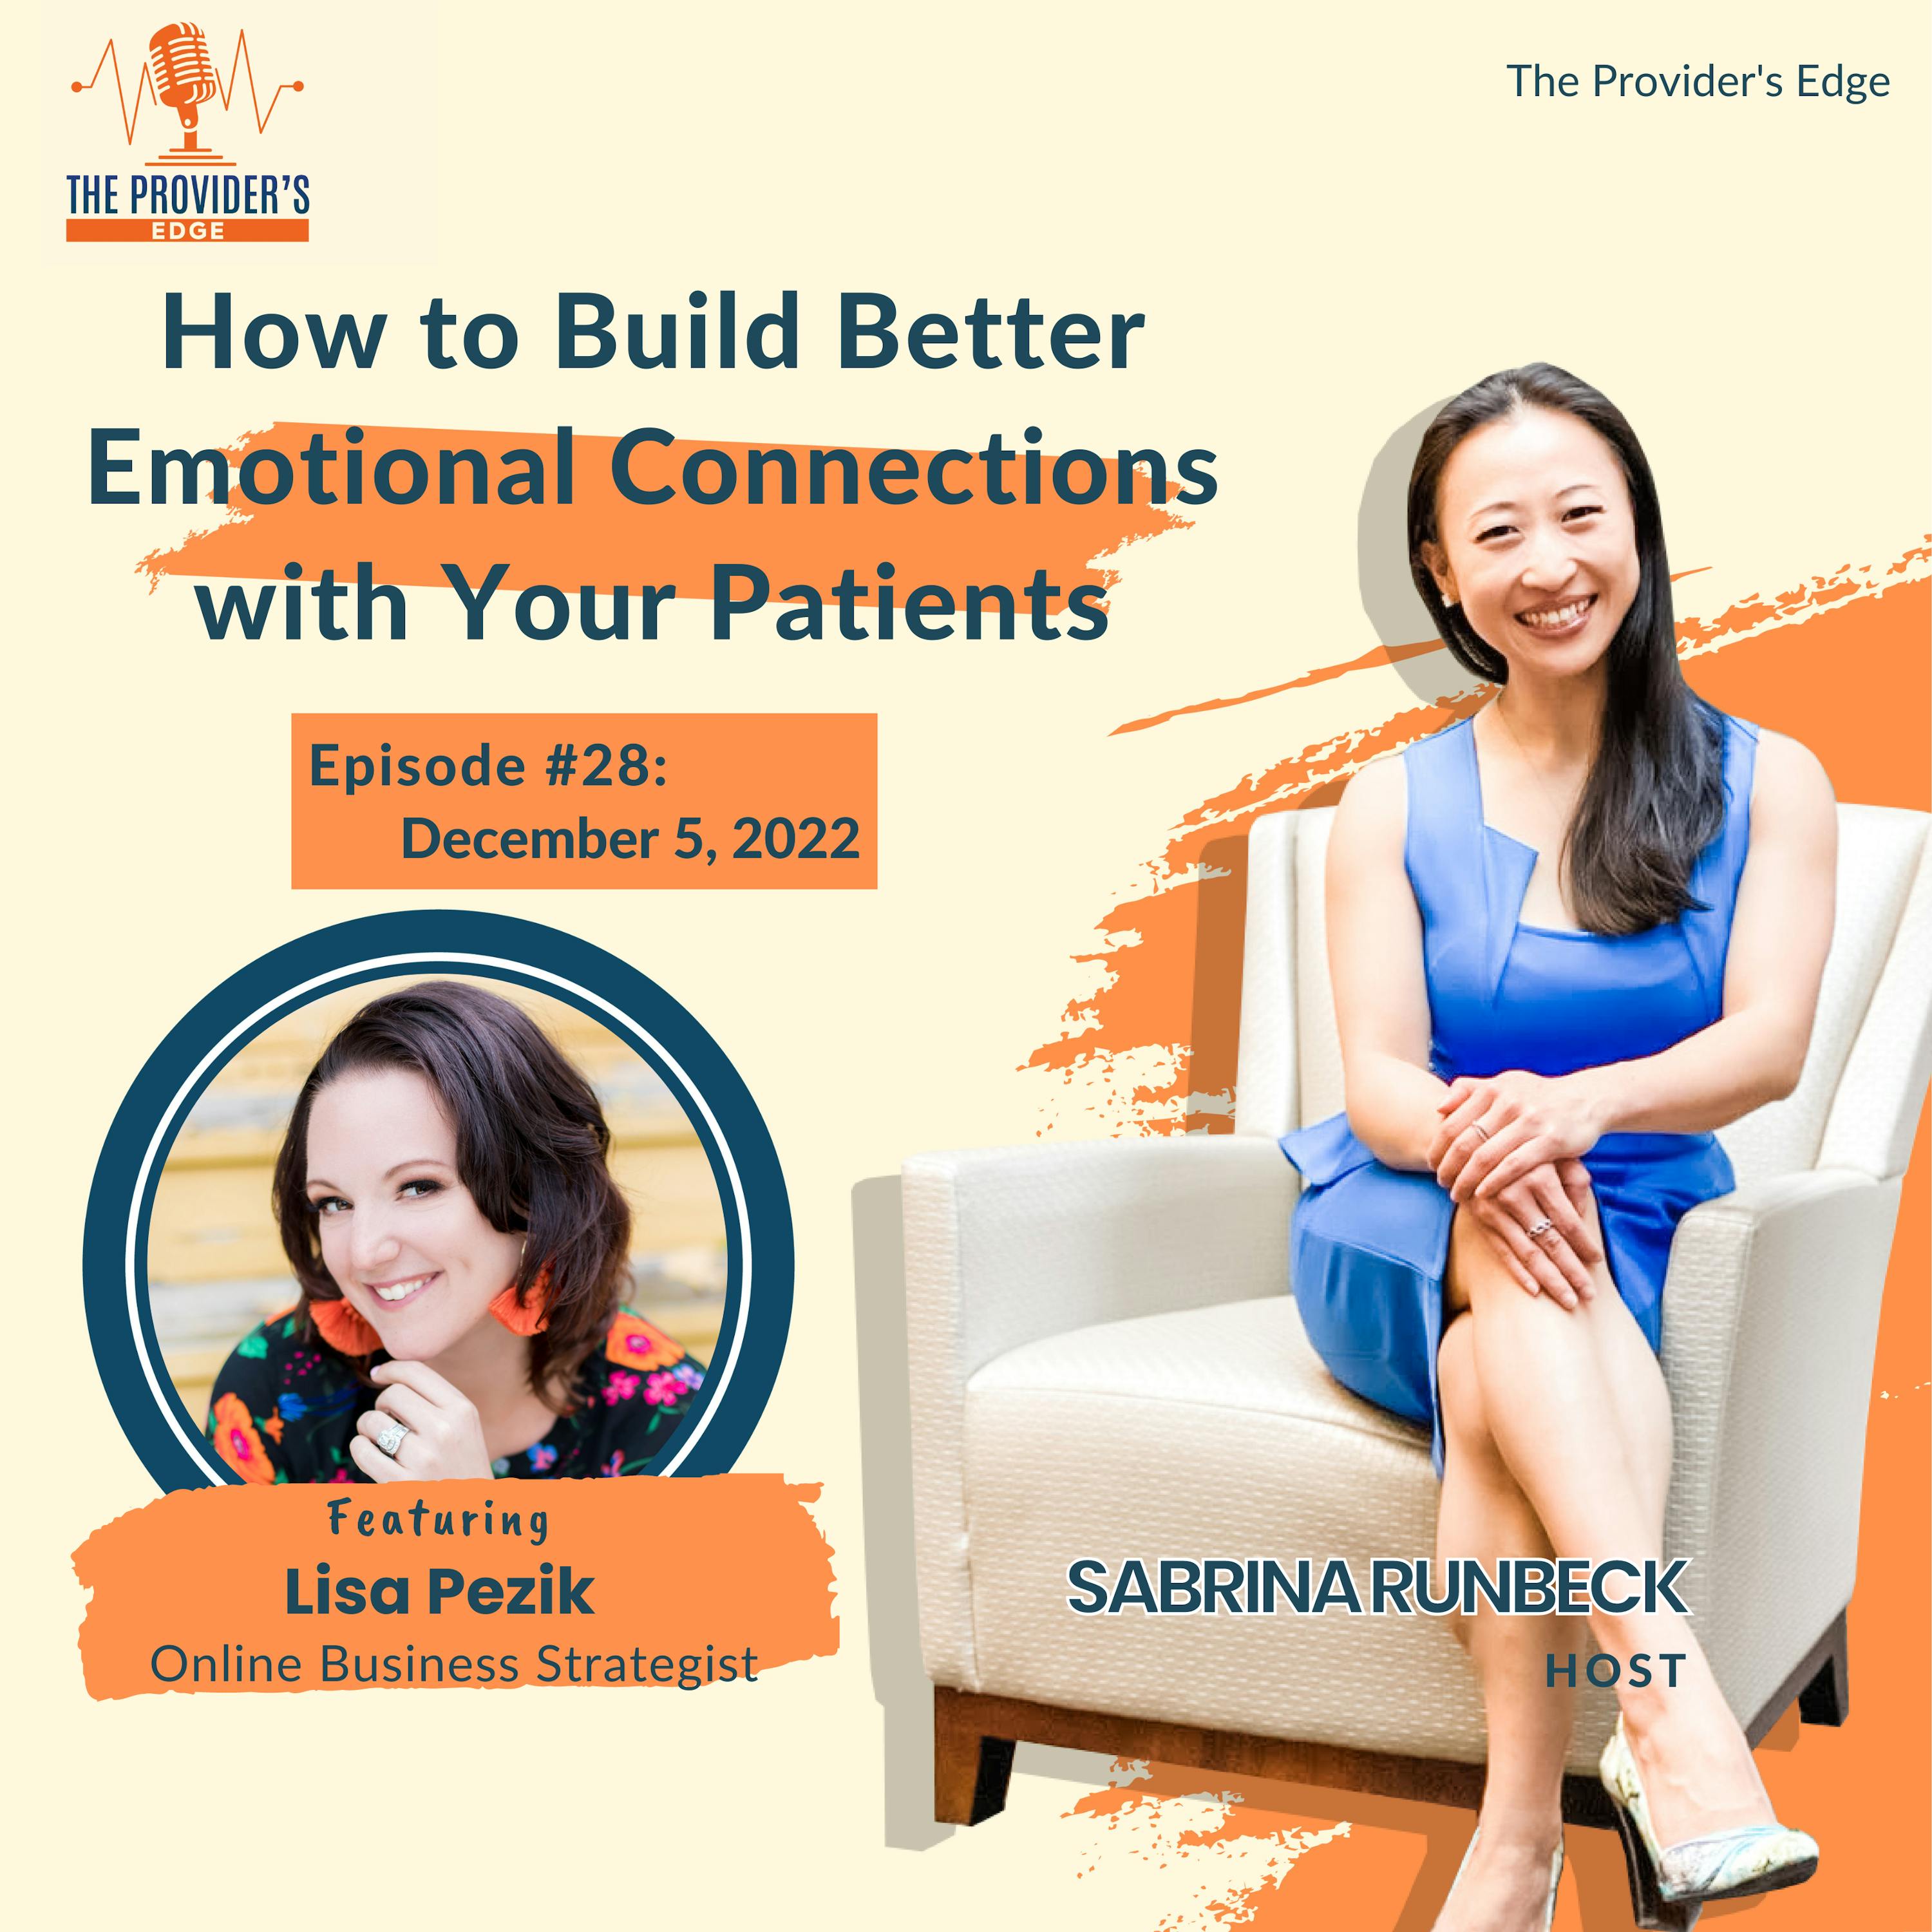 How to Build Better Emotional Connections with Your Patients Ep 28 with Lisa Pezik